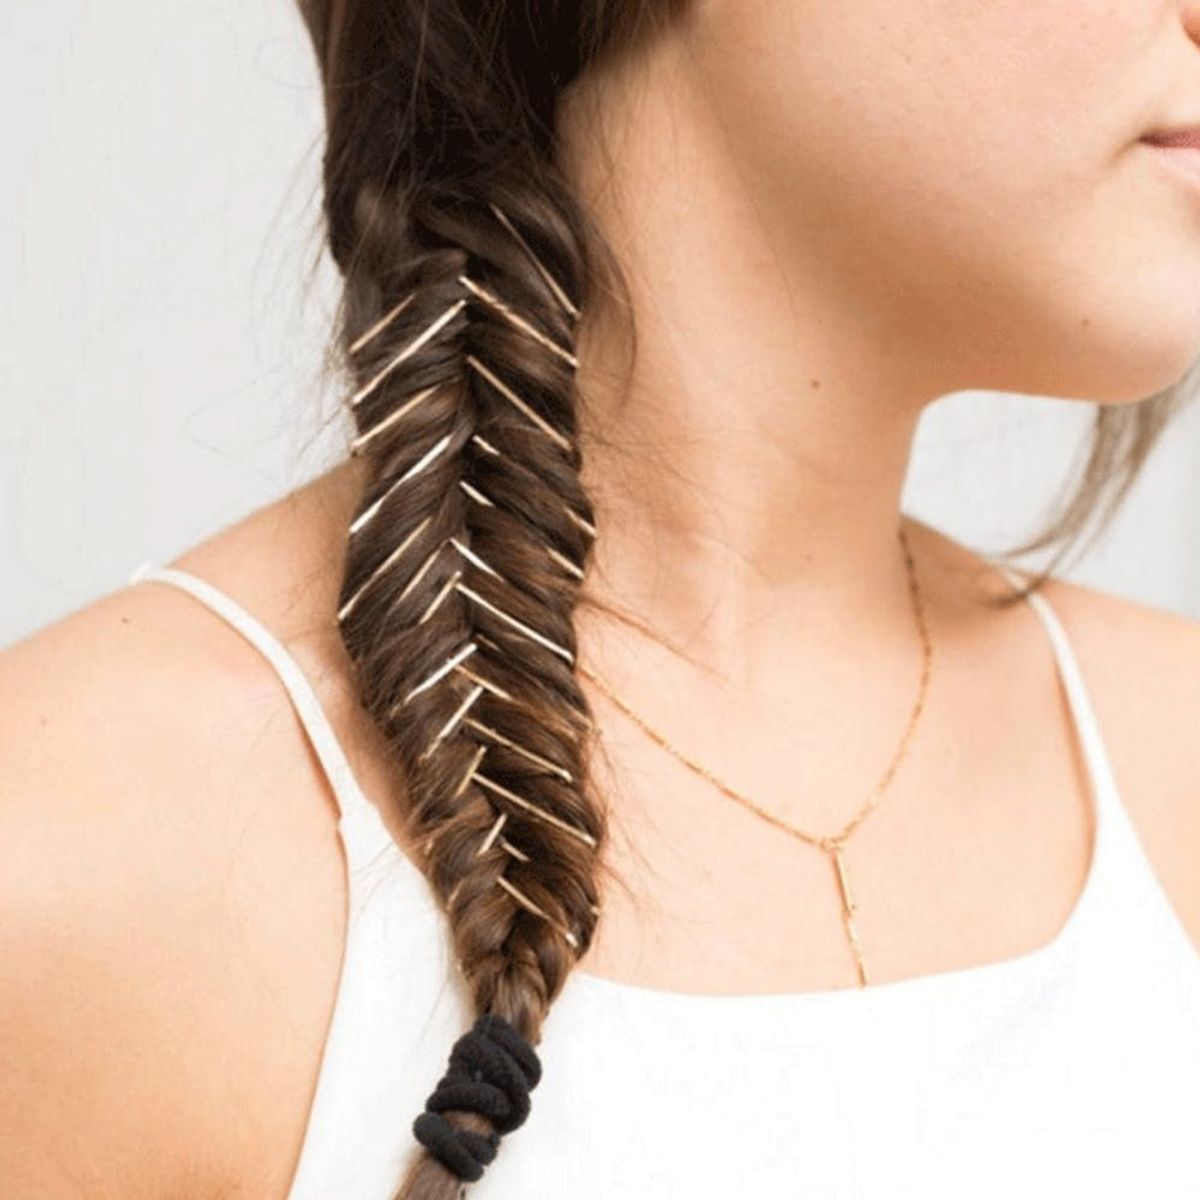 11 Prom Hairstyles That Prove the More Bobby Pins the Better